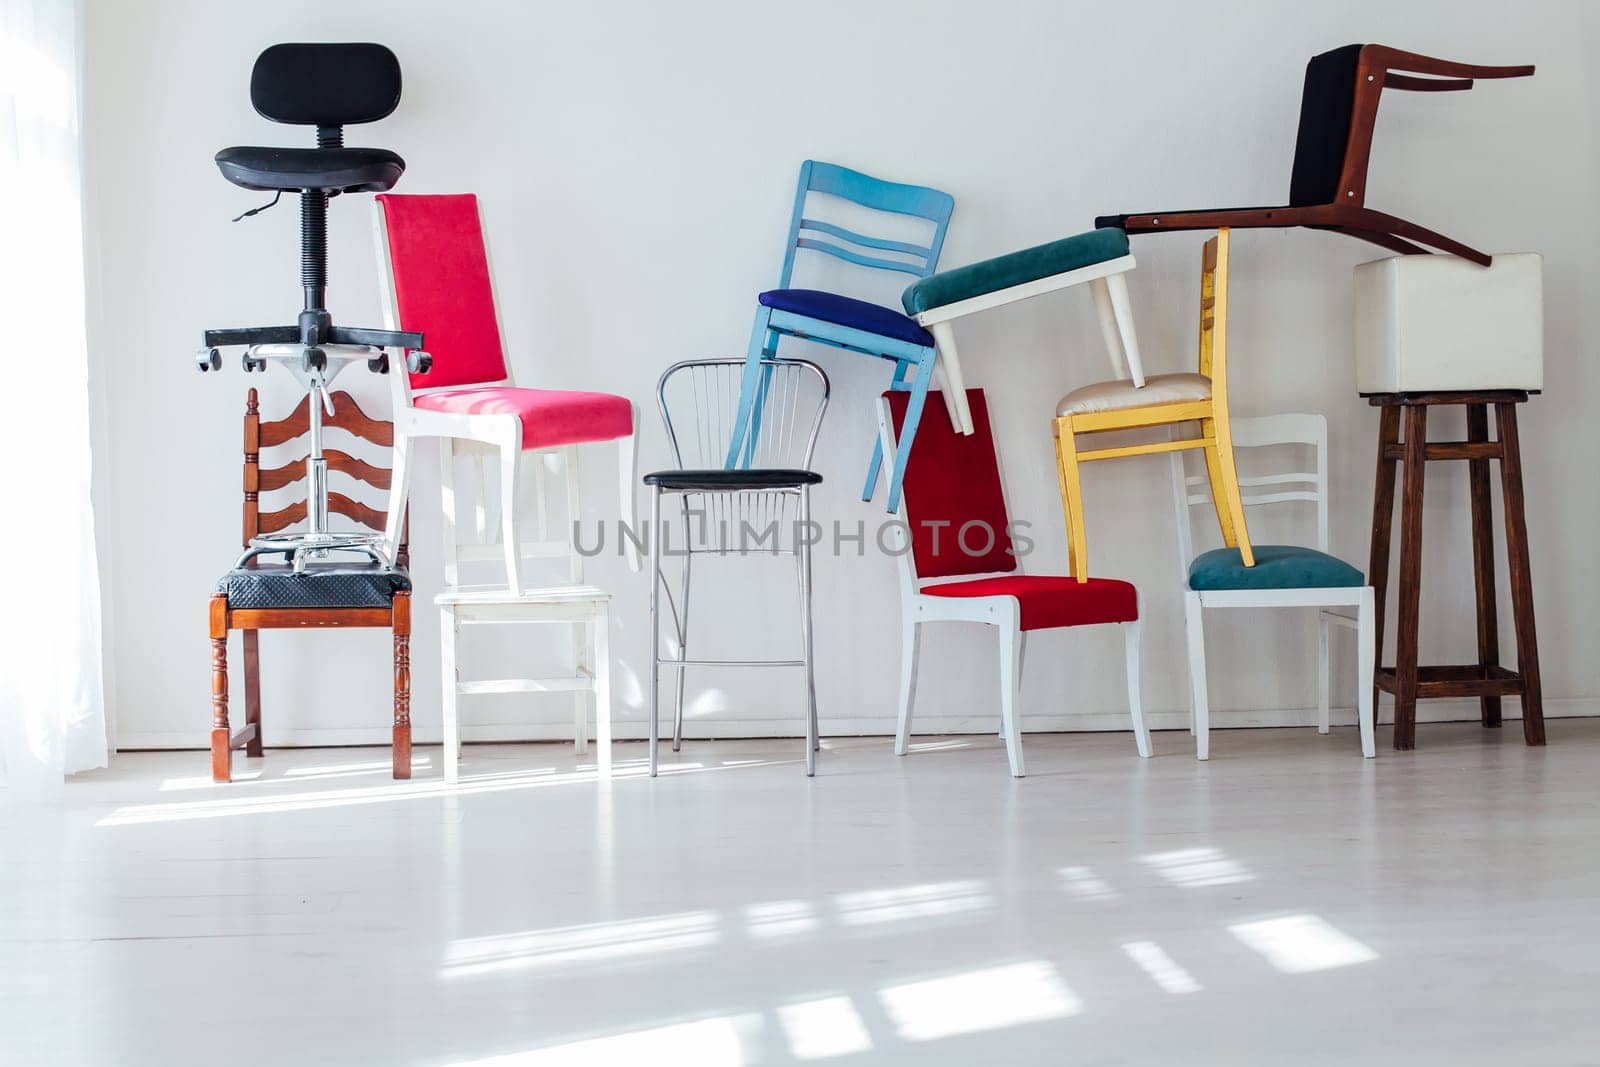 lots of different chairs in the interior of the white room moving